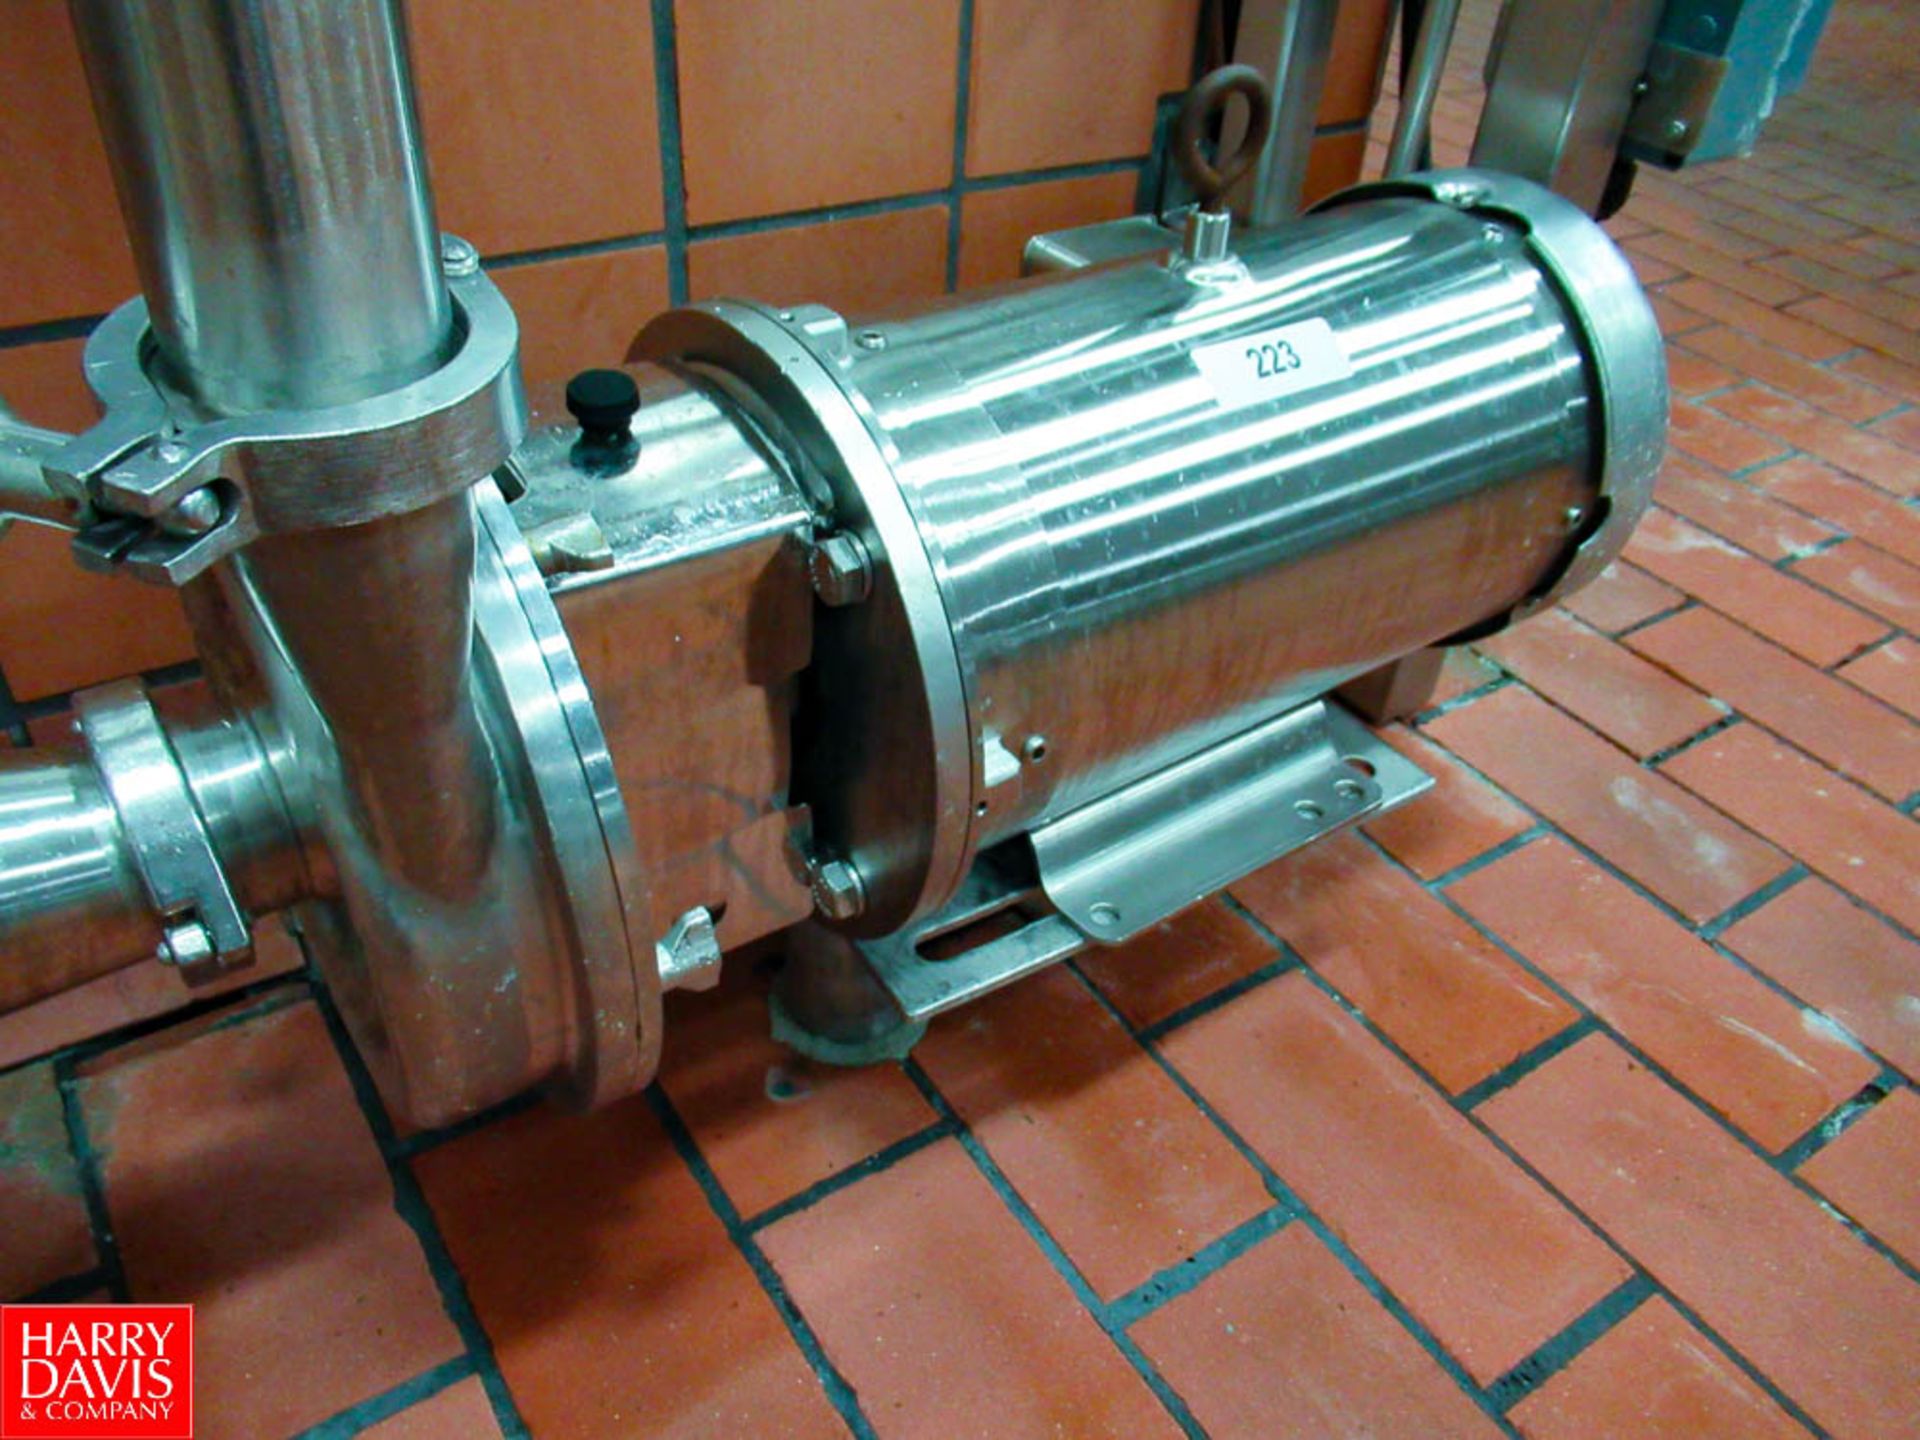 5 HP All Stainless Centfrifugal Pump, 3480 RPM, 230/460V, 2" x 2" Located In: HTST Room - Rigging